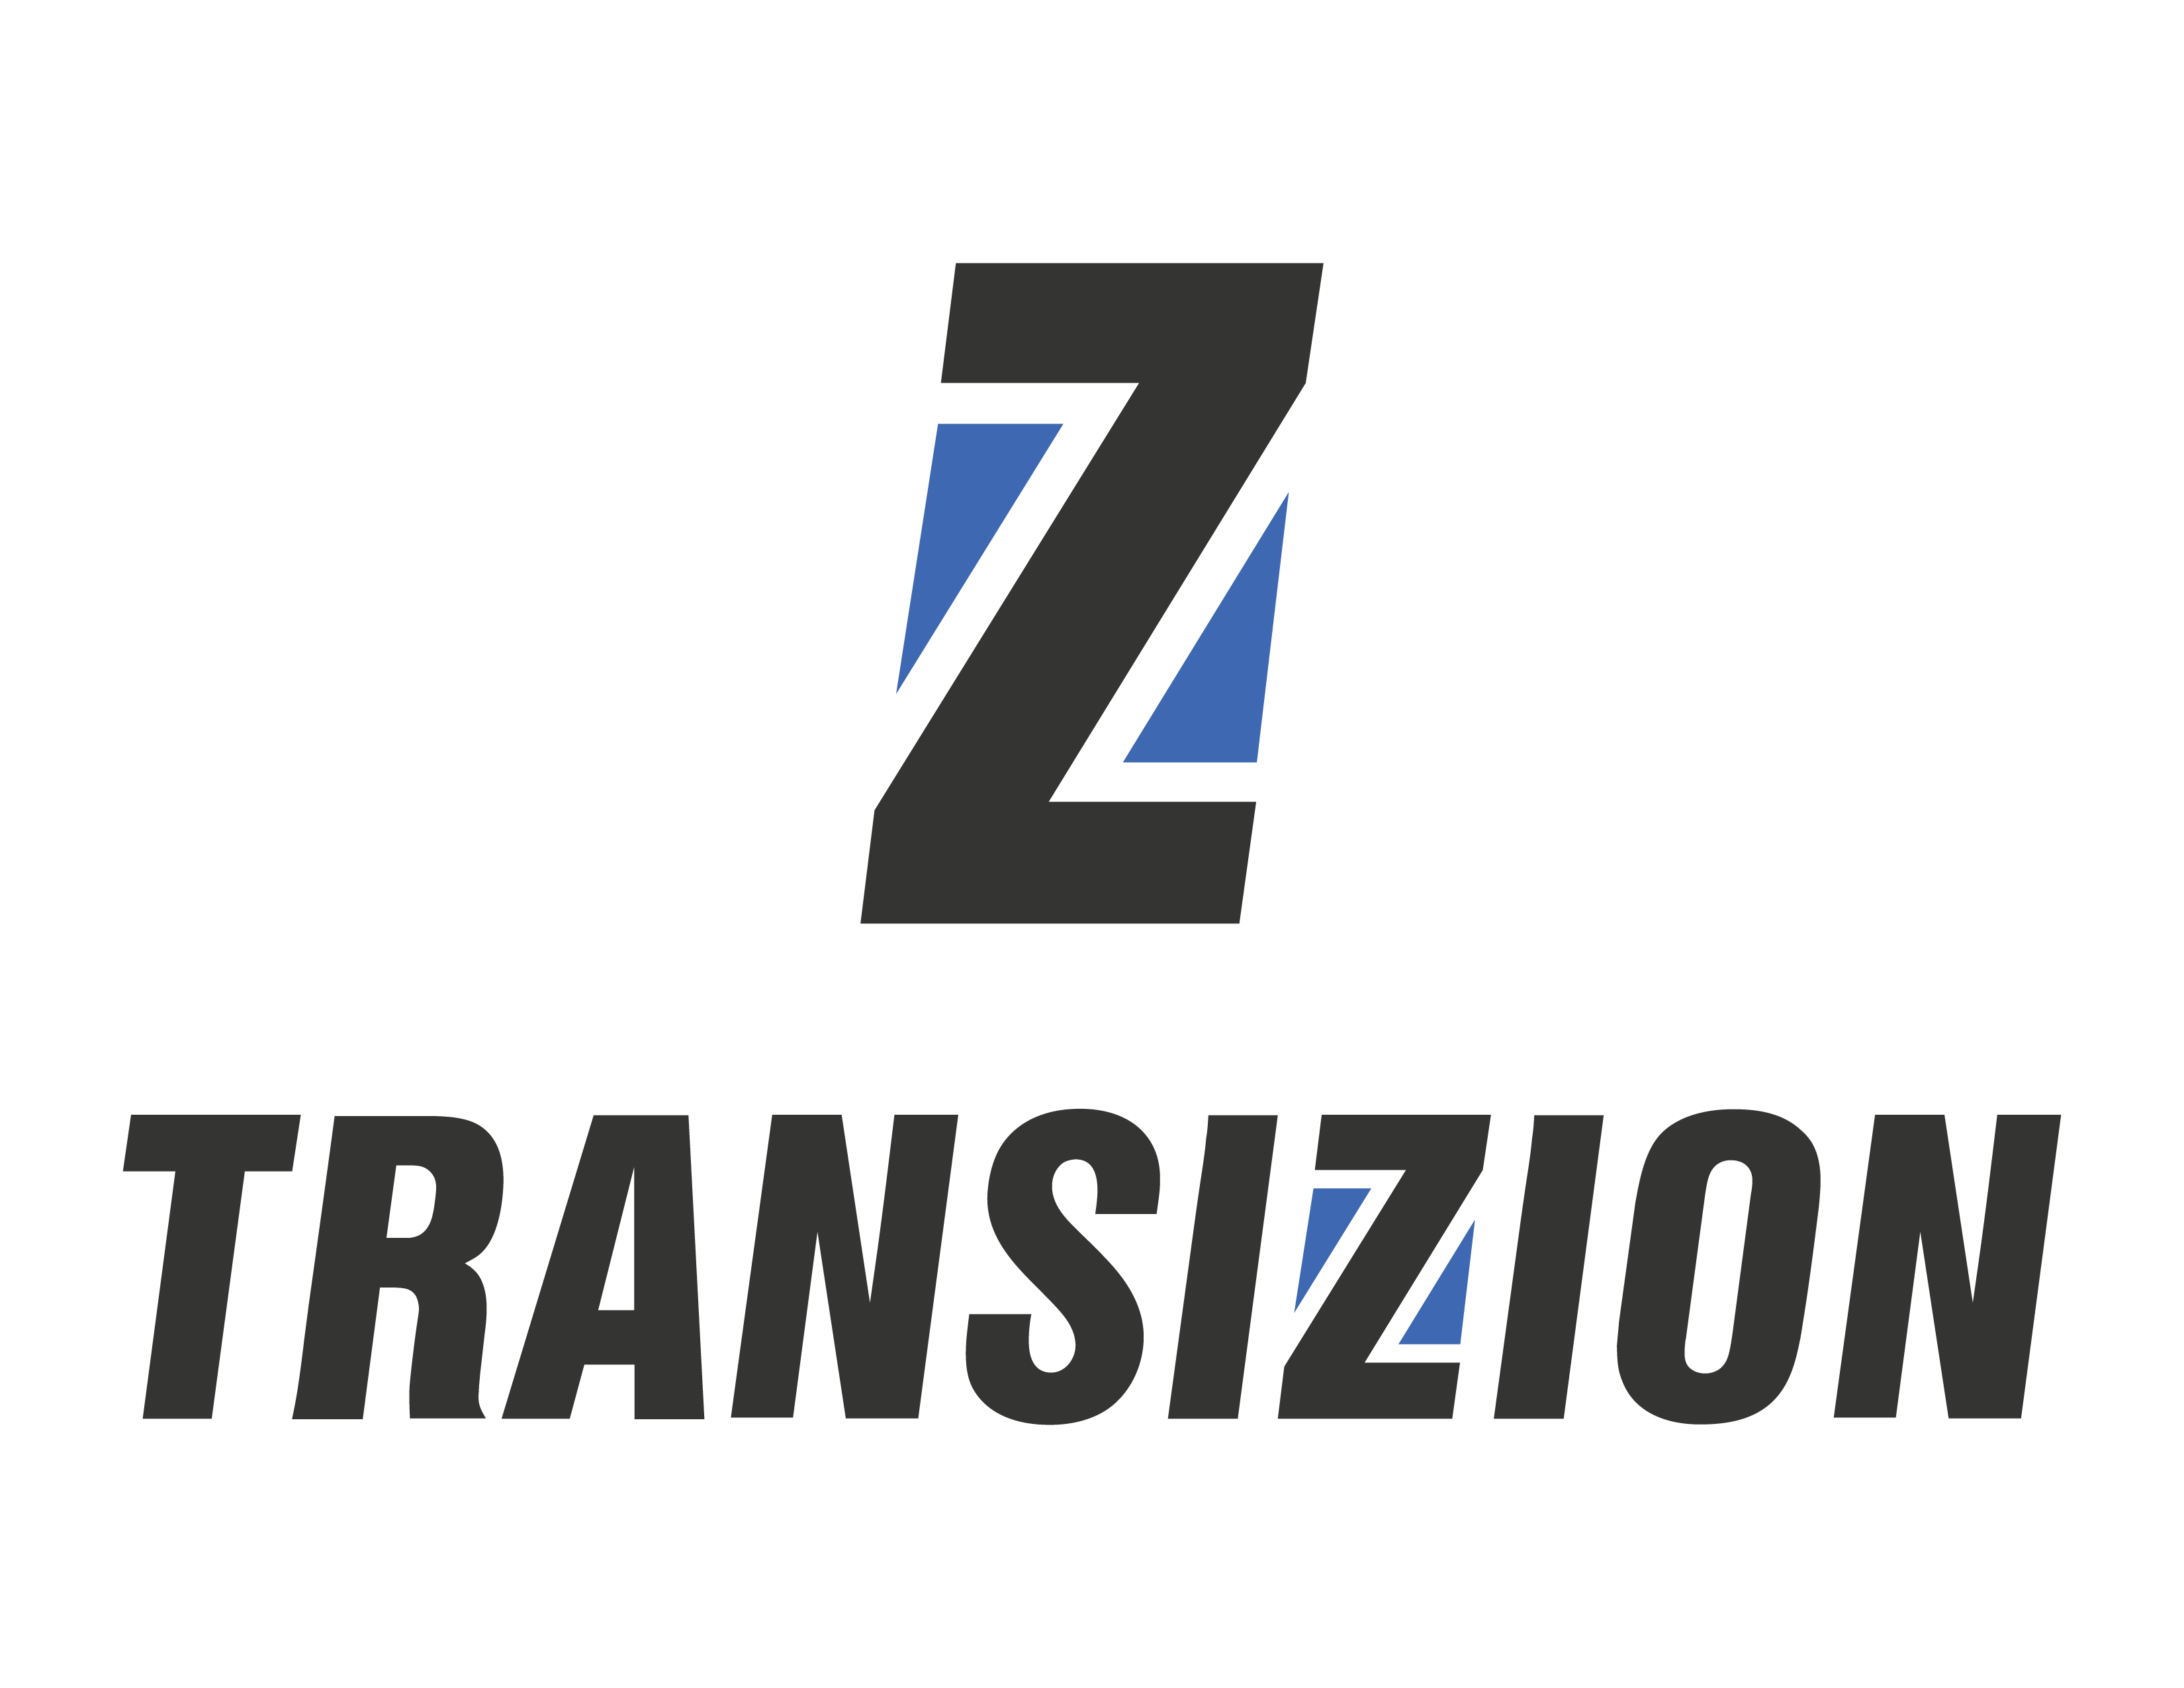 Transizion, Makers of Online Platform That Matches Students with Professional Mentors, Launches Equity Crowdfunding Campaign 